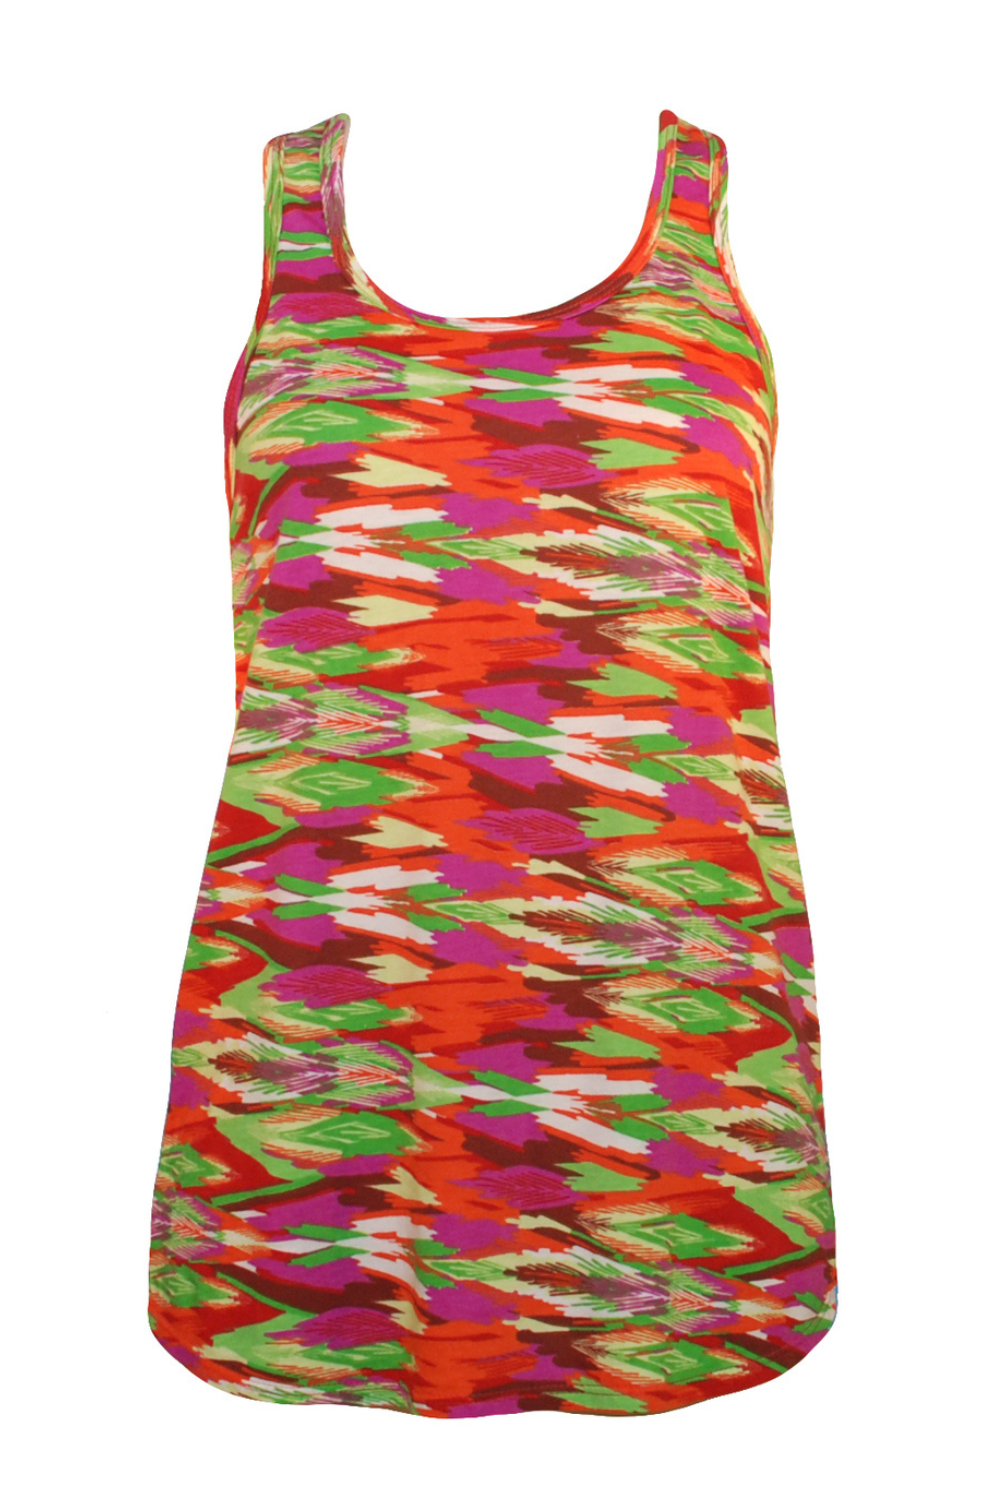 Brightly colored abstract feather print racerback tank top